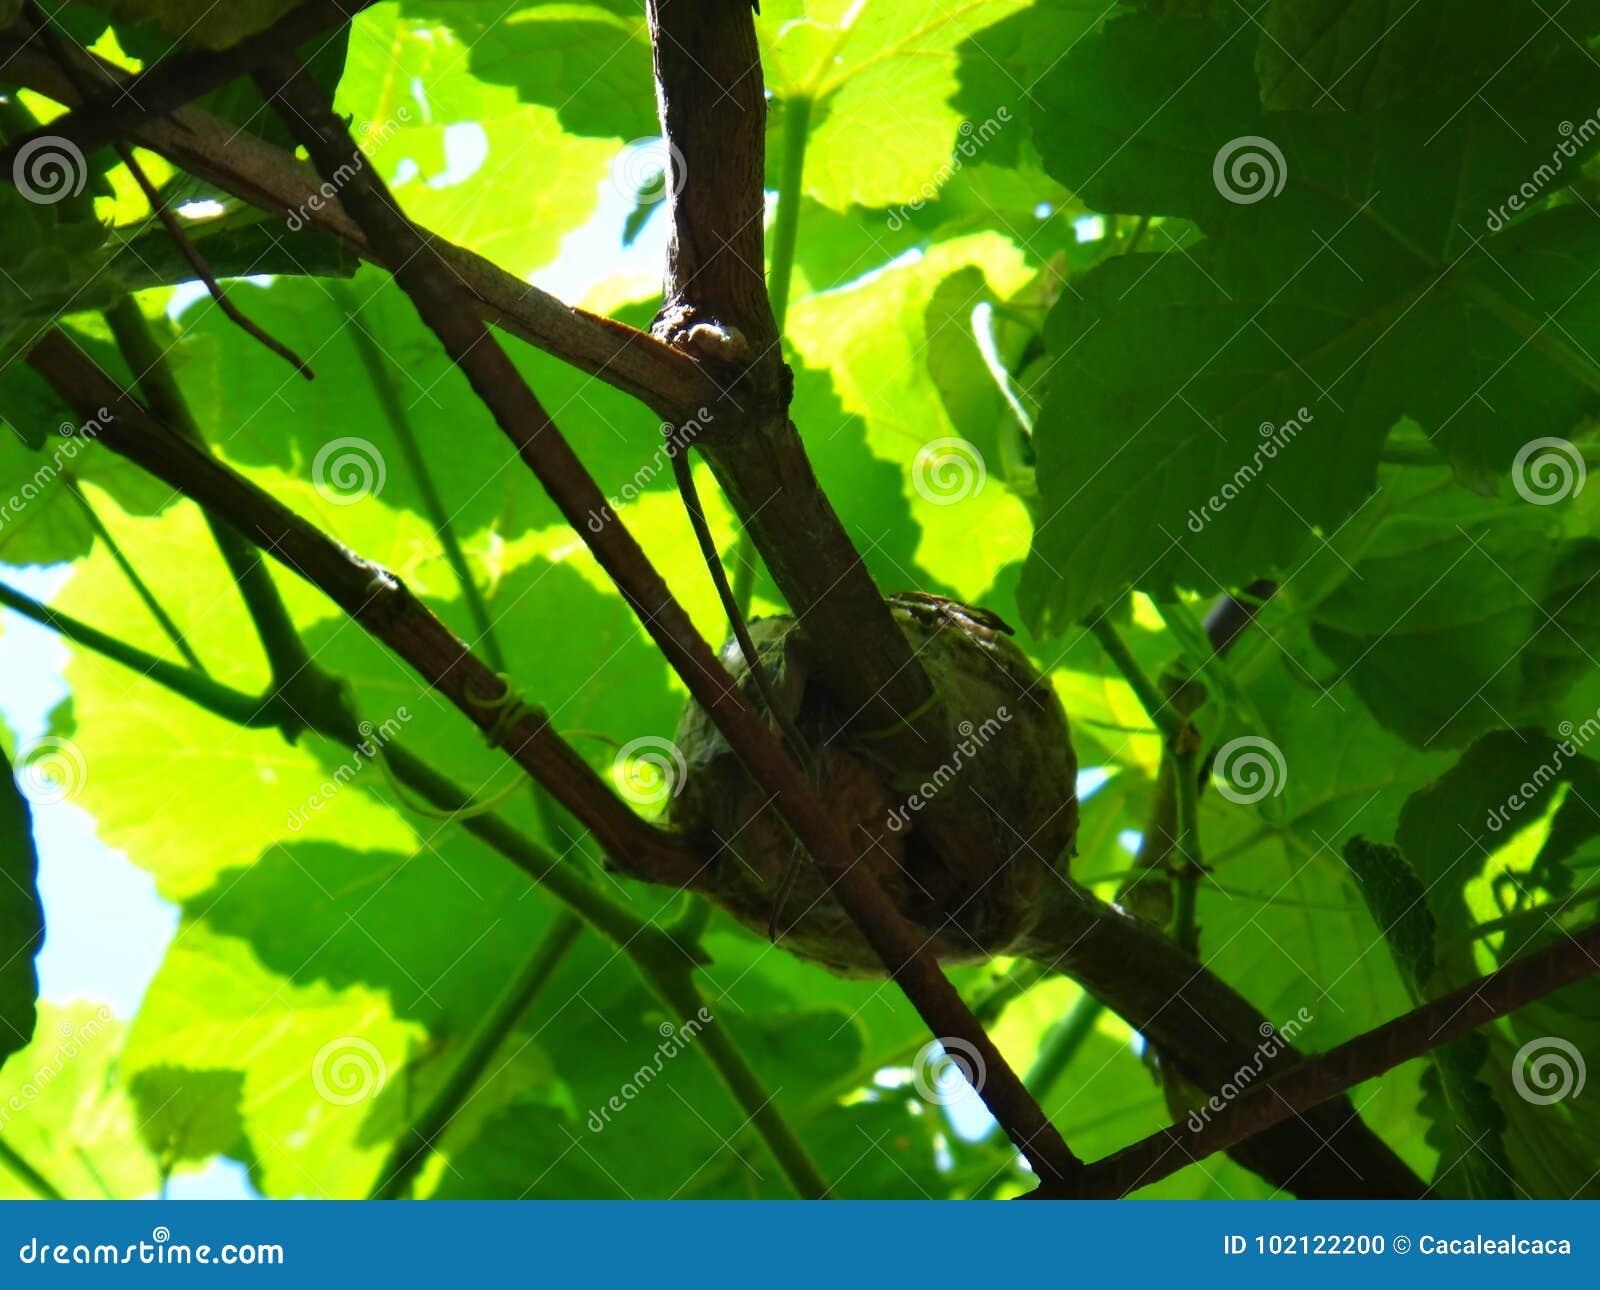 nest of hummingbird in the grapevine